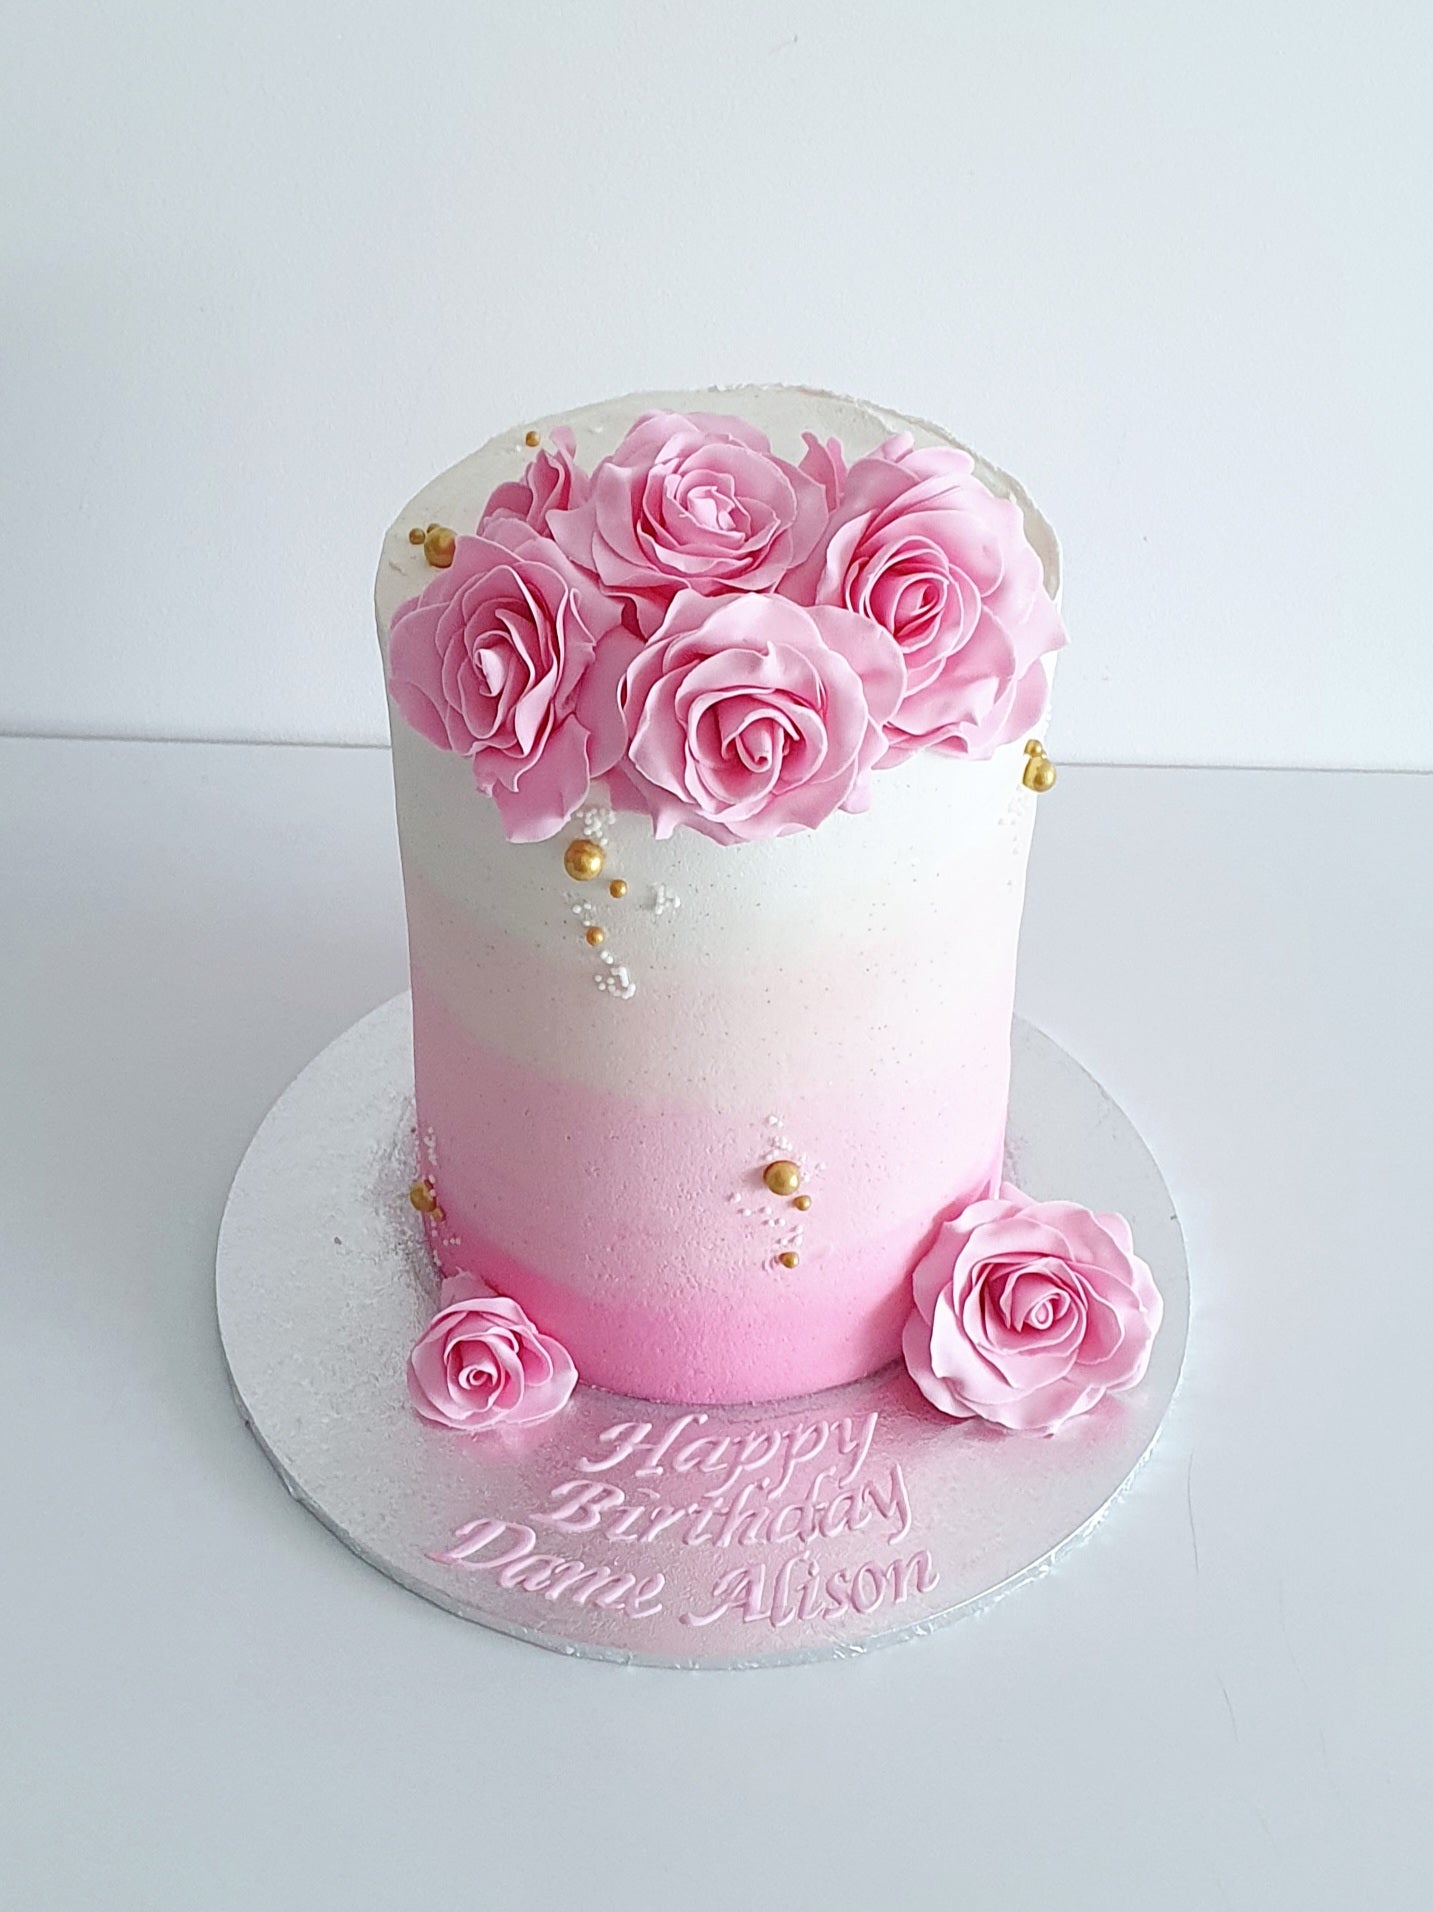 New Zealand Cake Decorating Suppliers - Sweetness and Bite